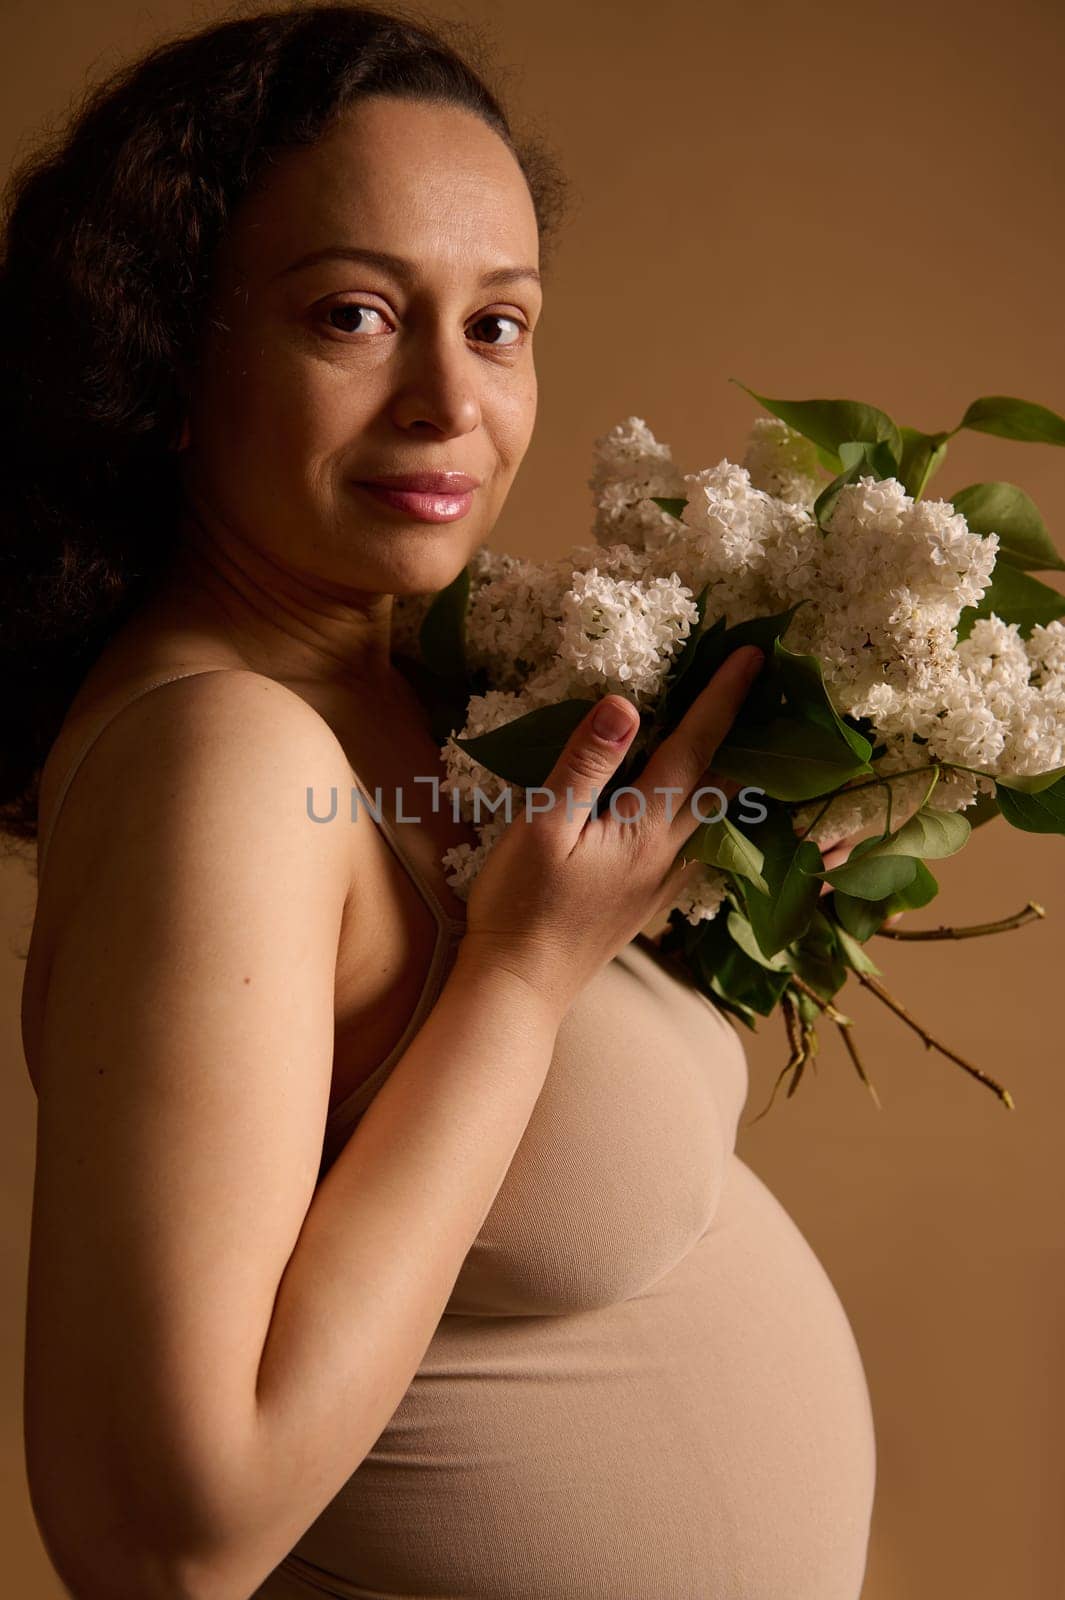 Beautiful pregnant woman, gravid future mother expecting a baby, holding white blooming lilacs, smiles looking at camera by artgf